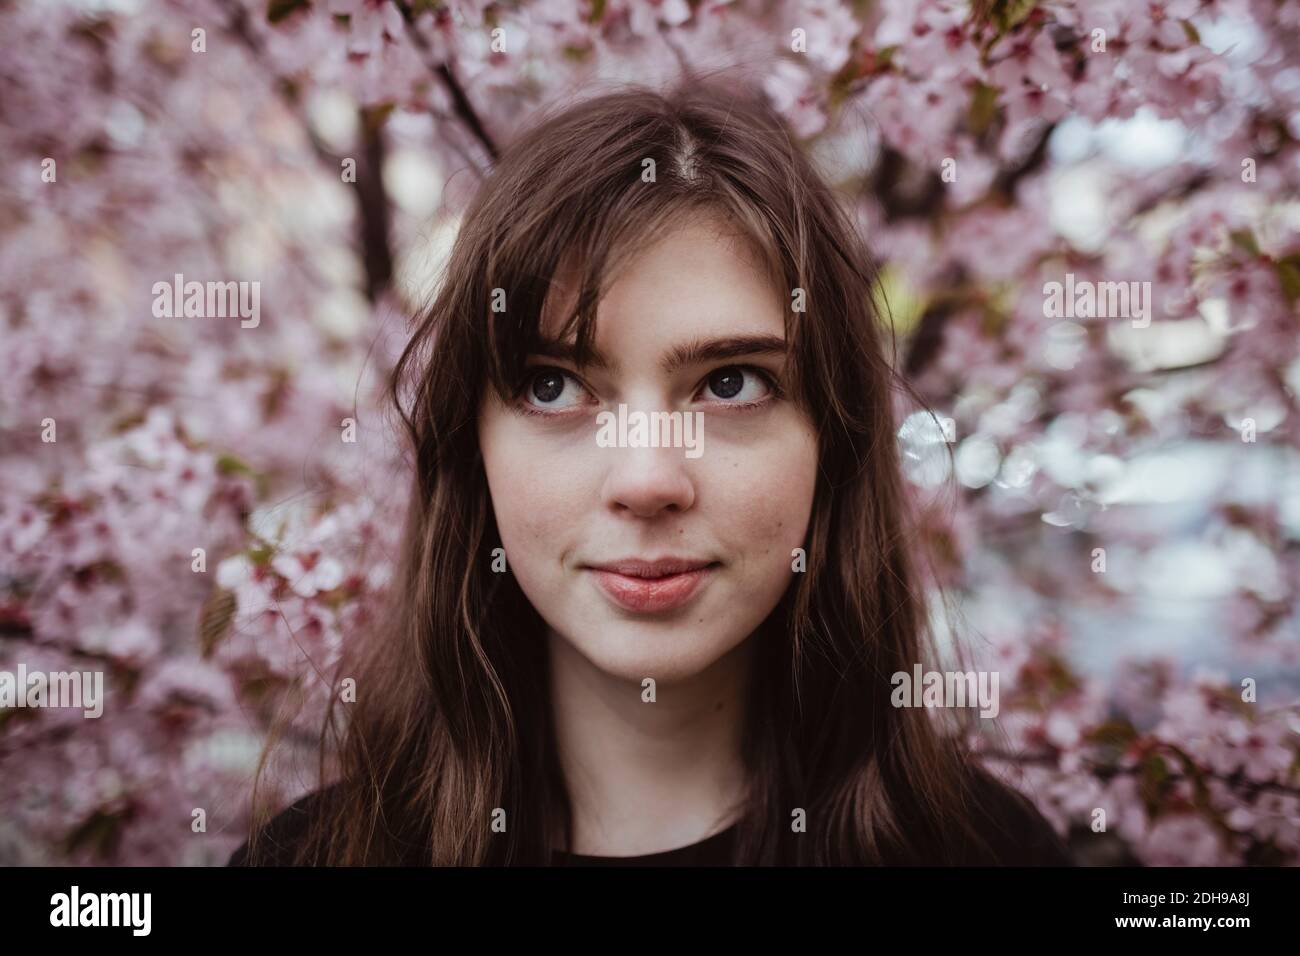 Smiling young woman looking away while standing against tree Stock Photo